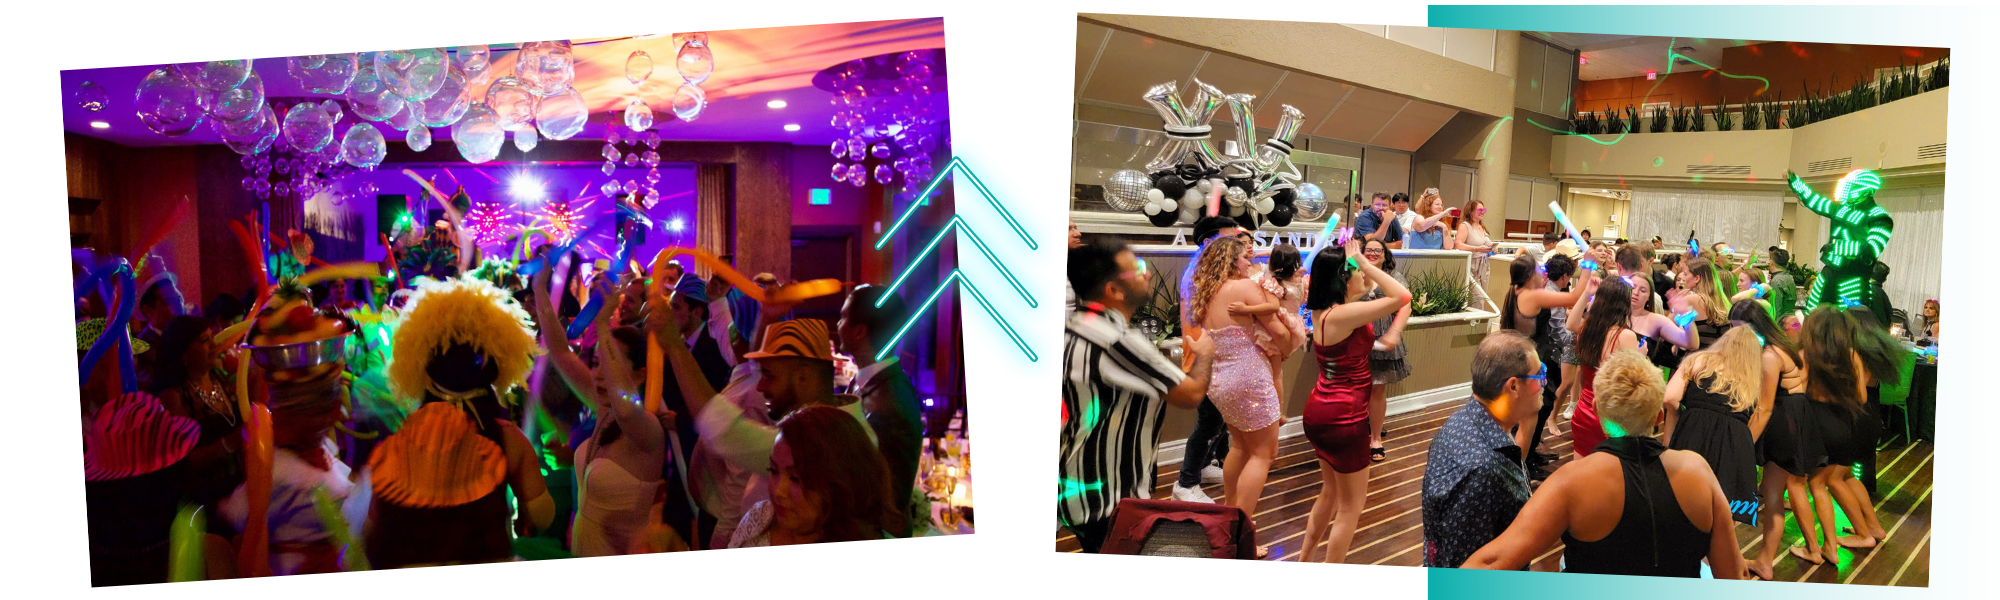 two parties with DJ and uplighting services 